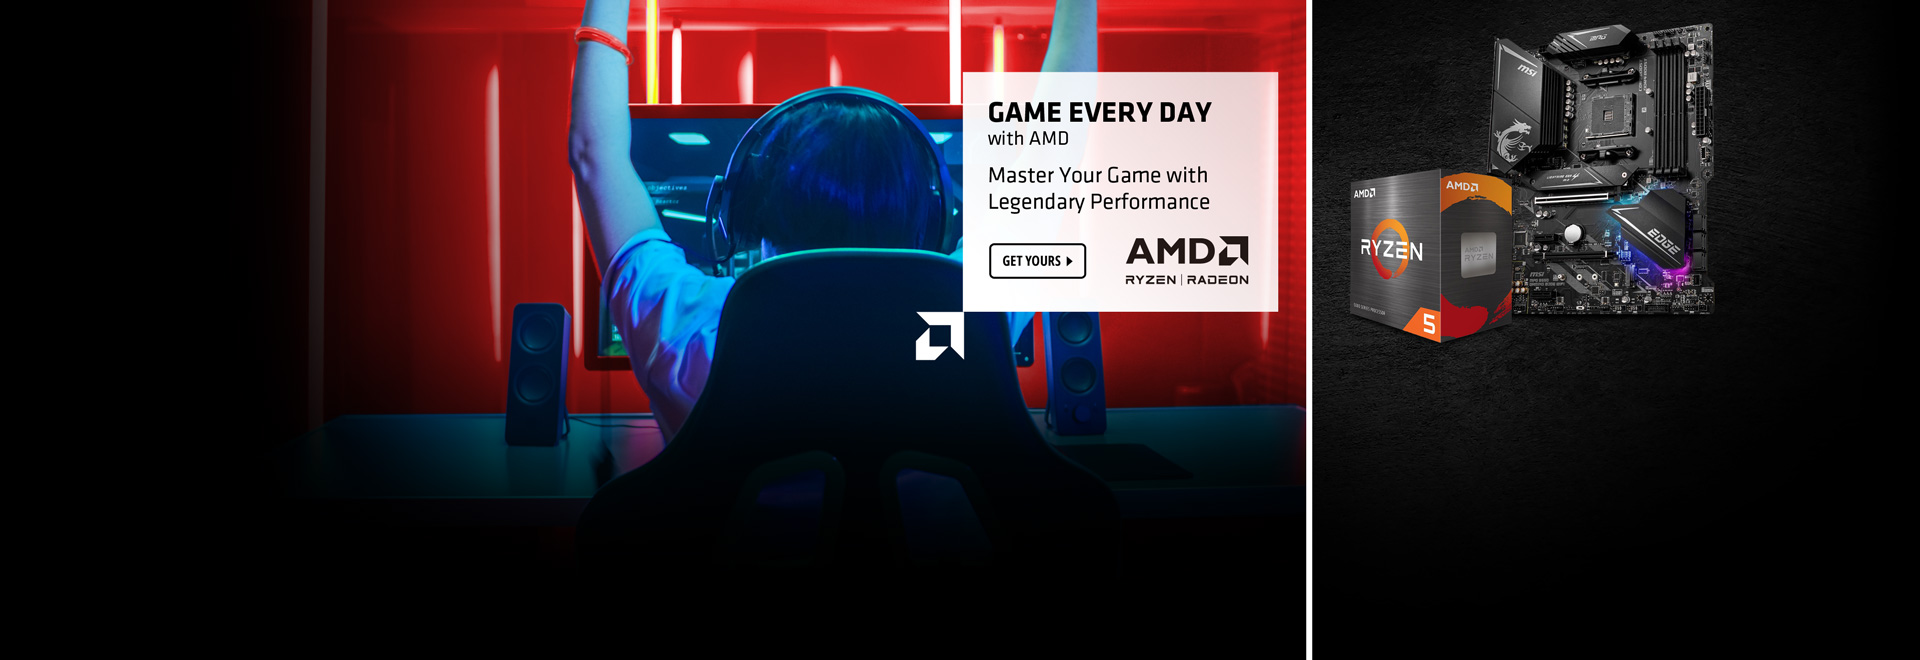 Game Every Day  with AMD